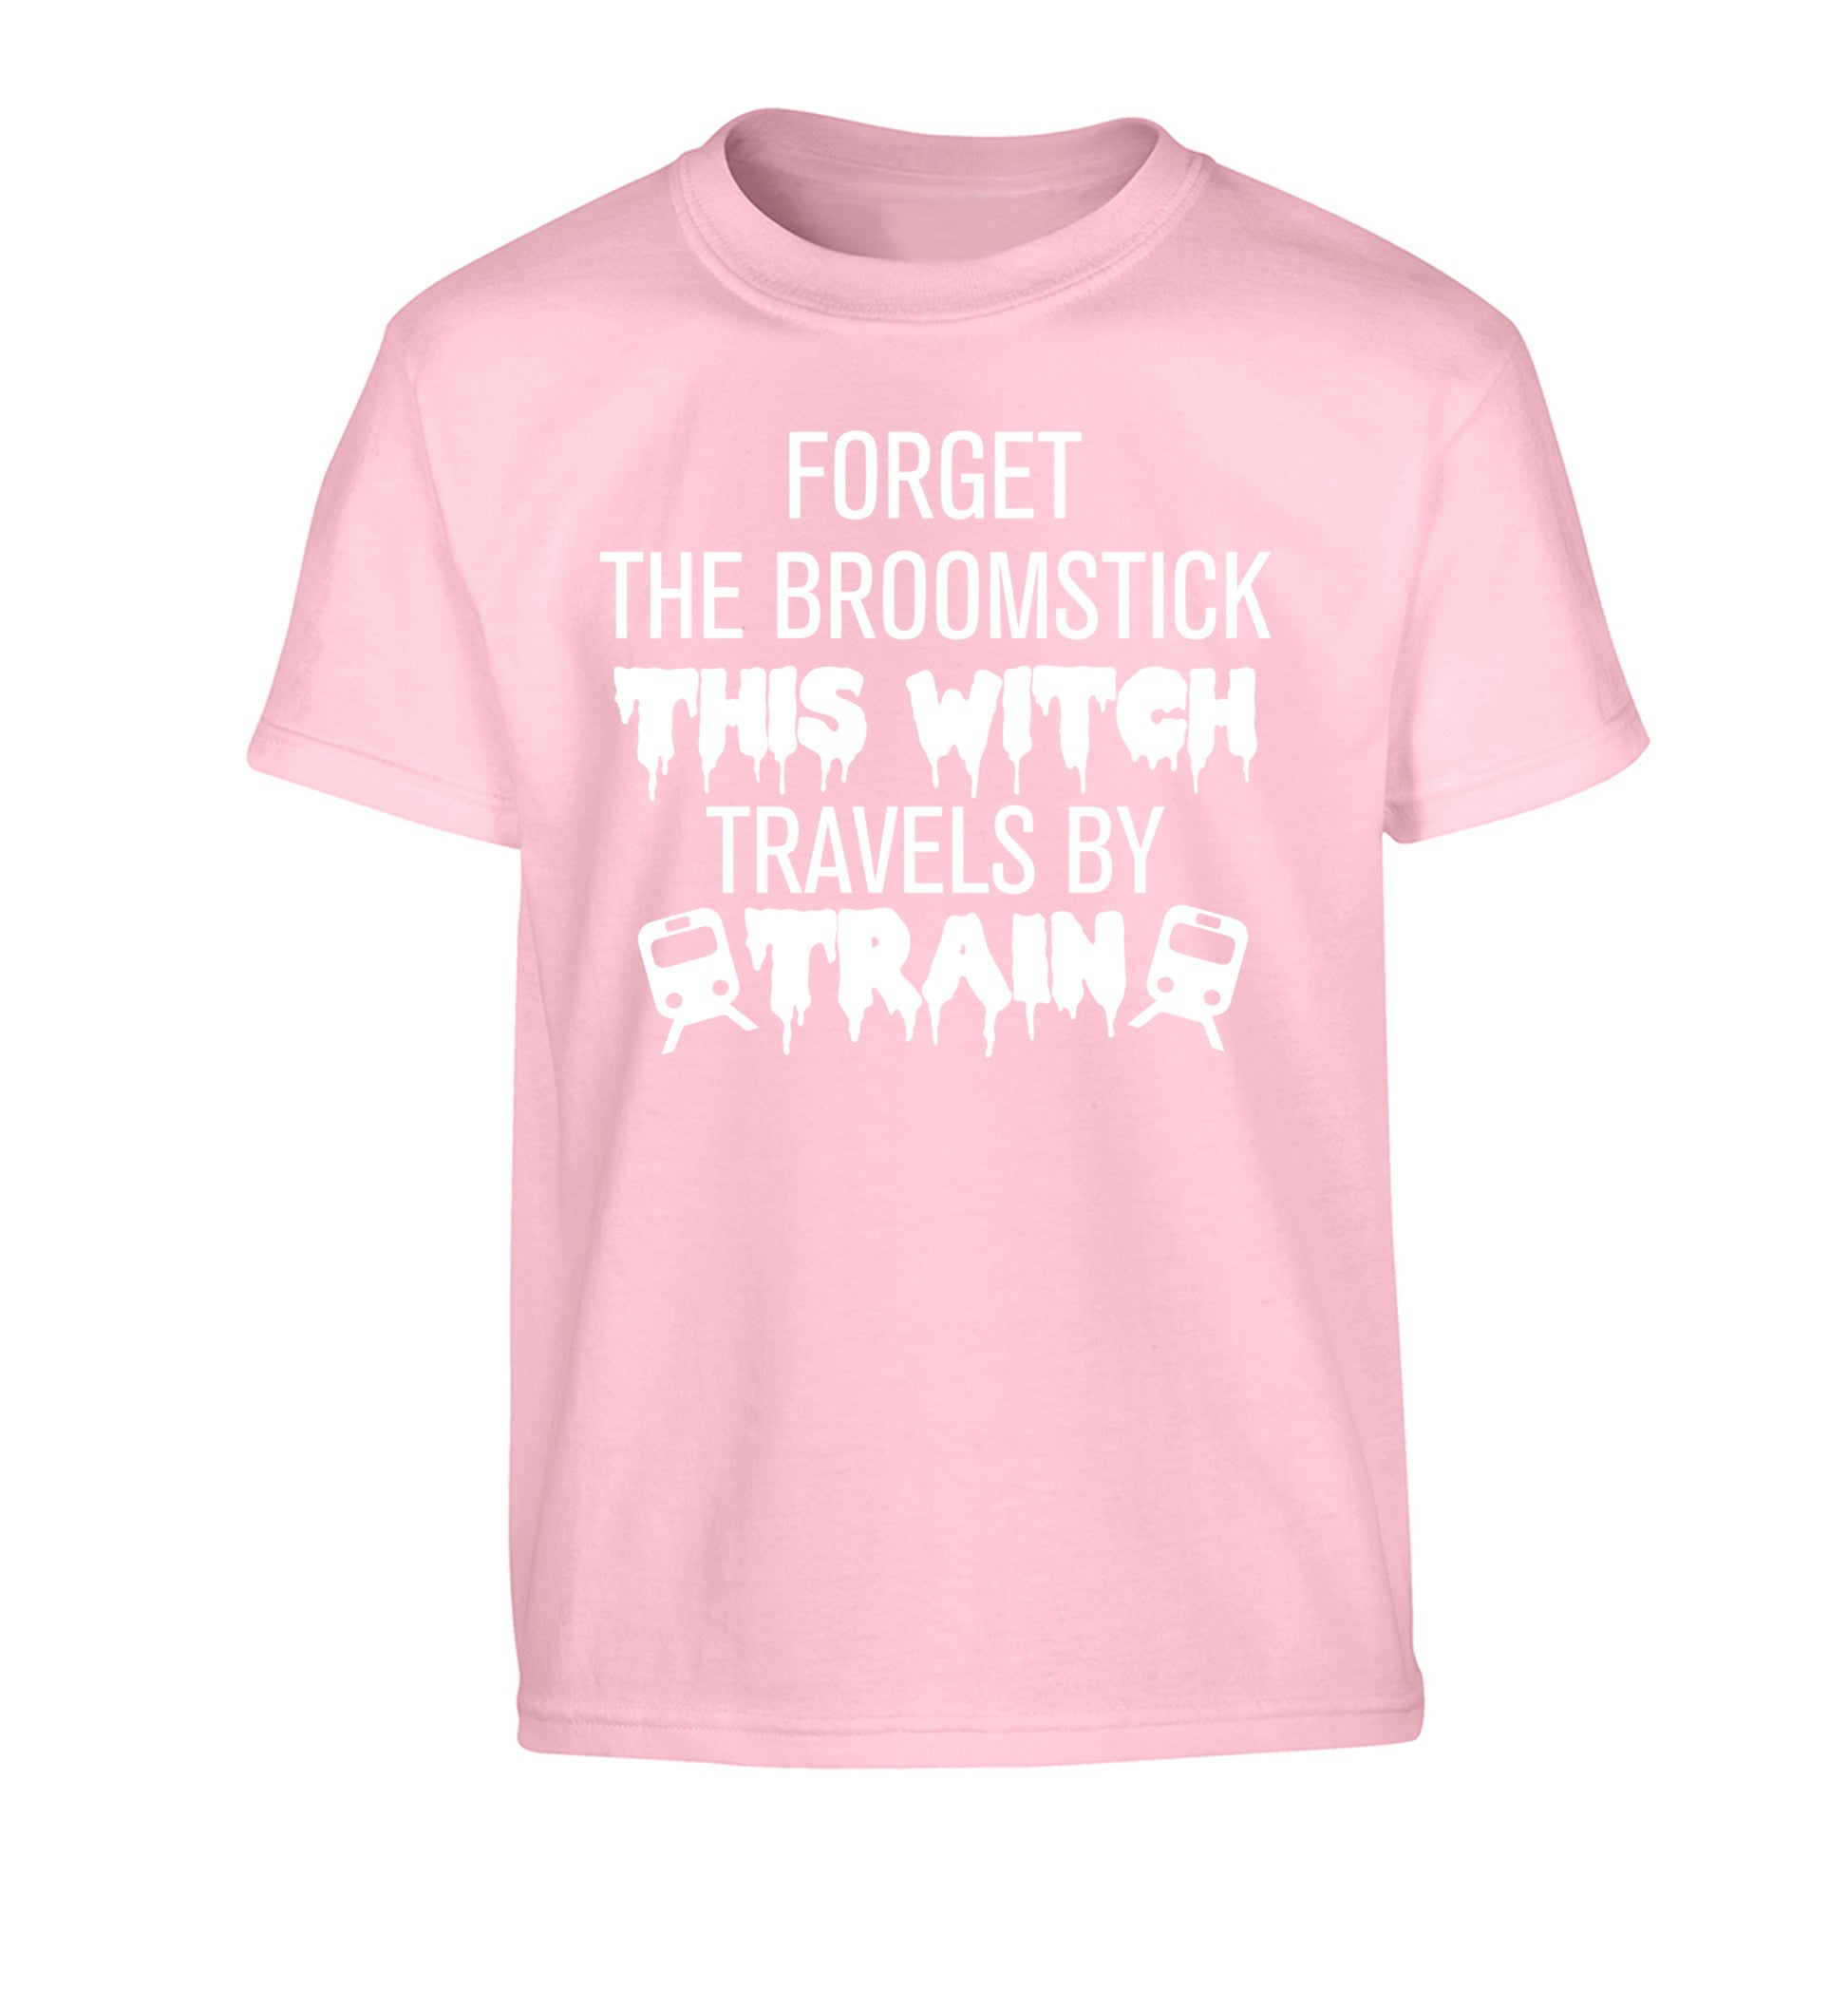 Forget the broomstick this witch travels by train Children's light pink Tshirt 12-14 Years